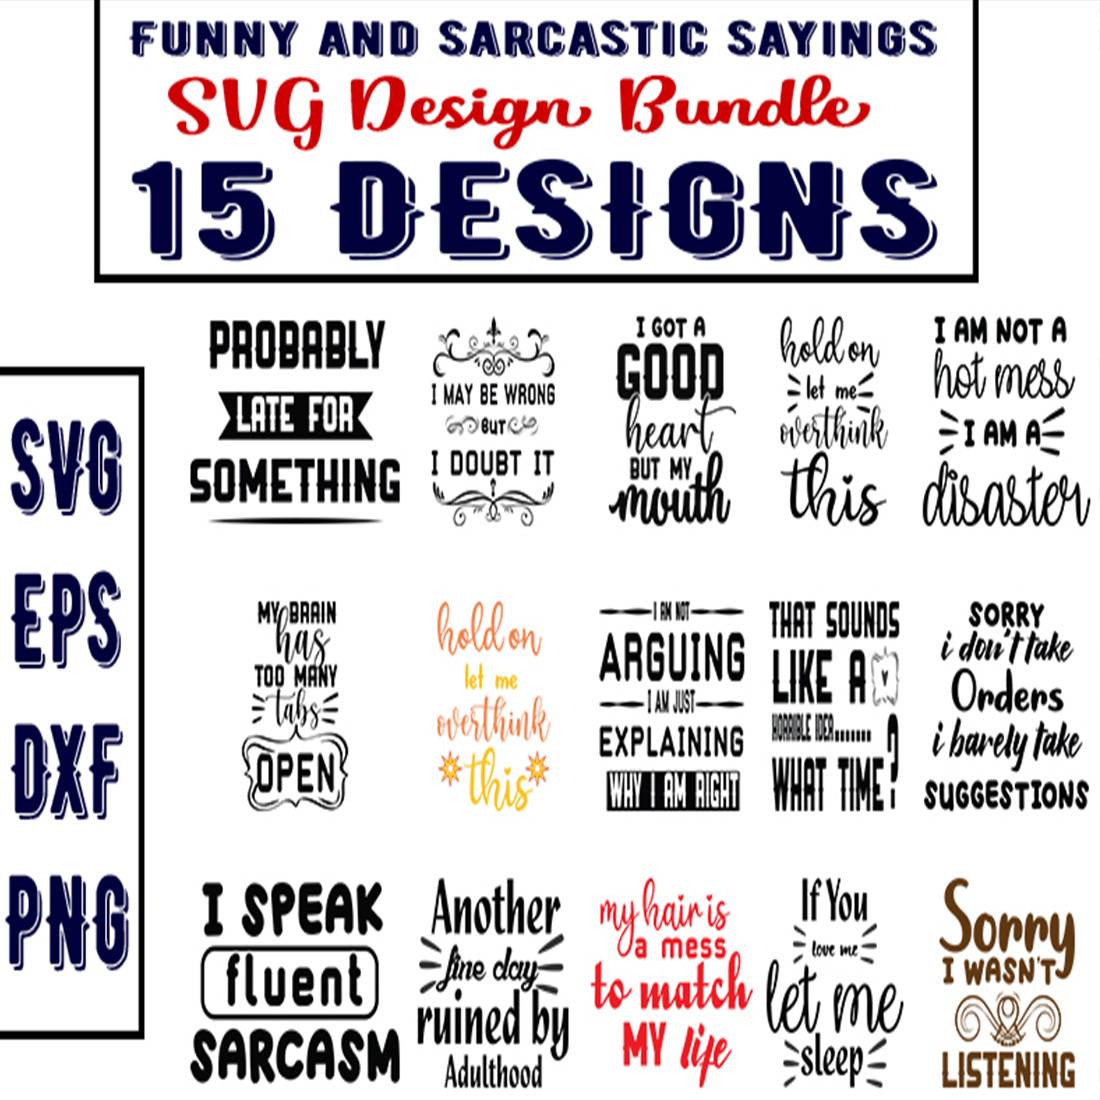 Funny and Sarcastic Sayings Bundle preview image.